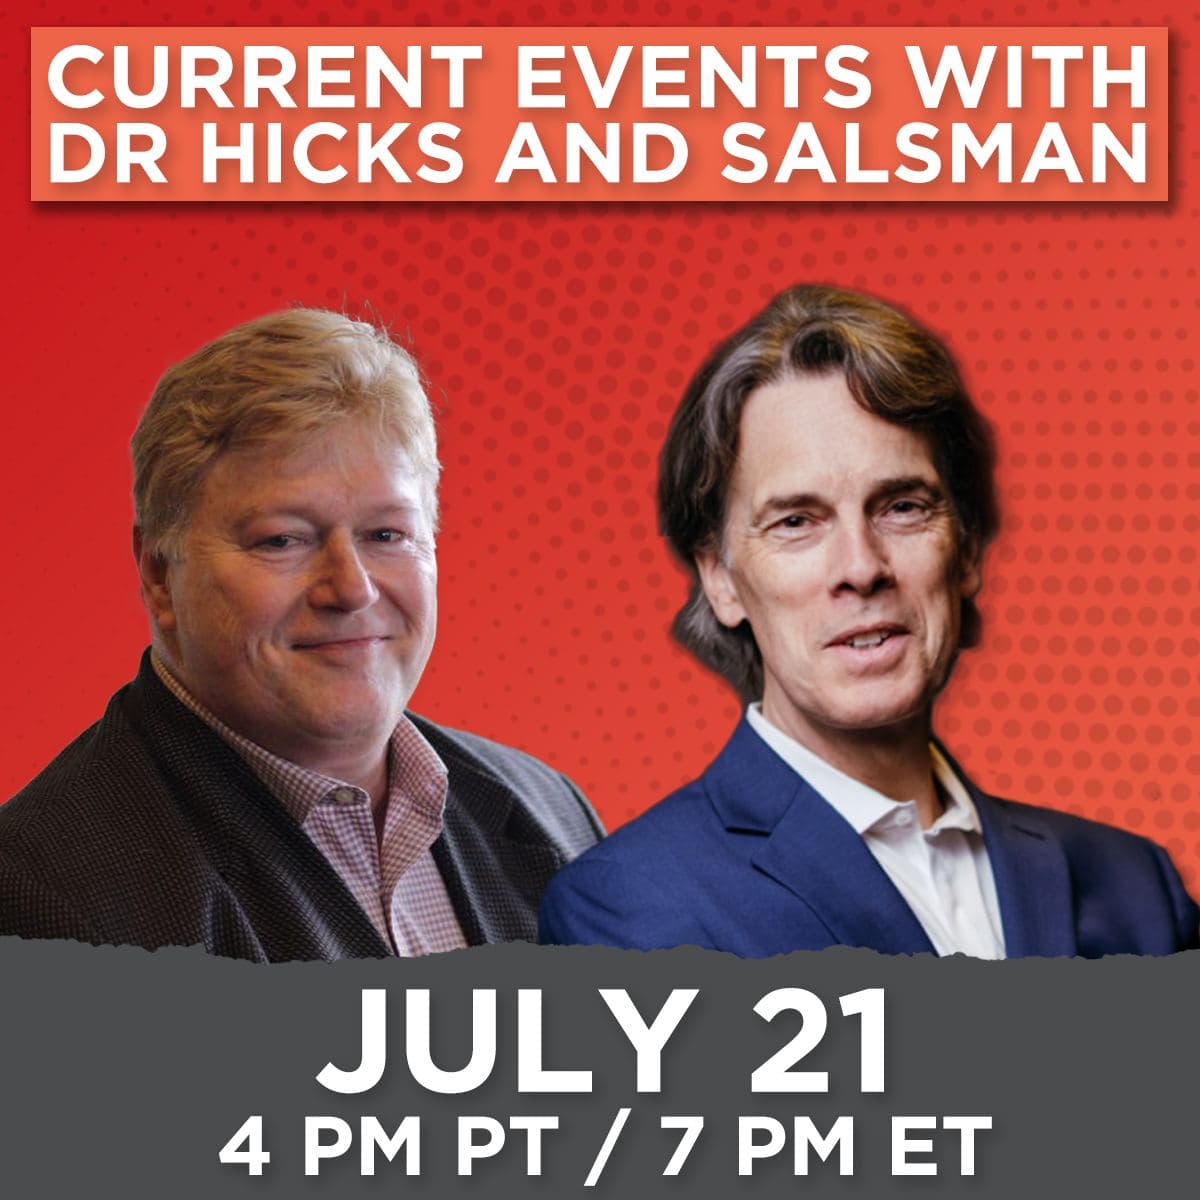 Current Events with Hicks and Salsman - July